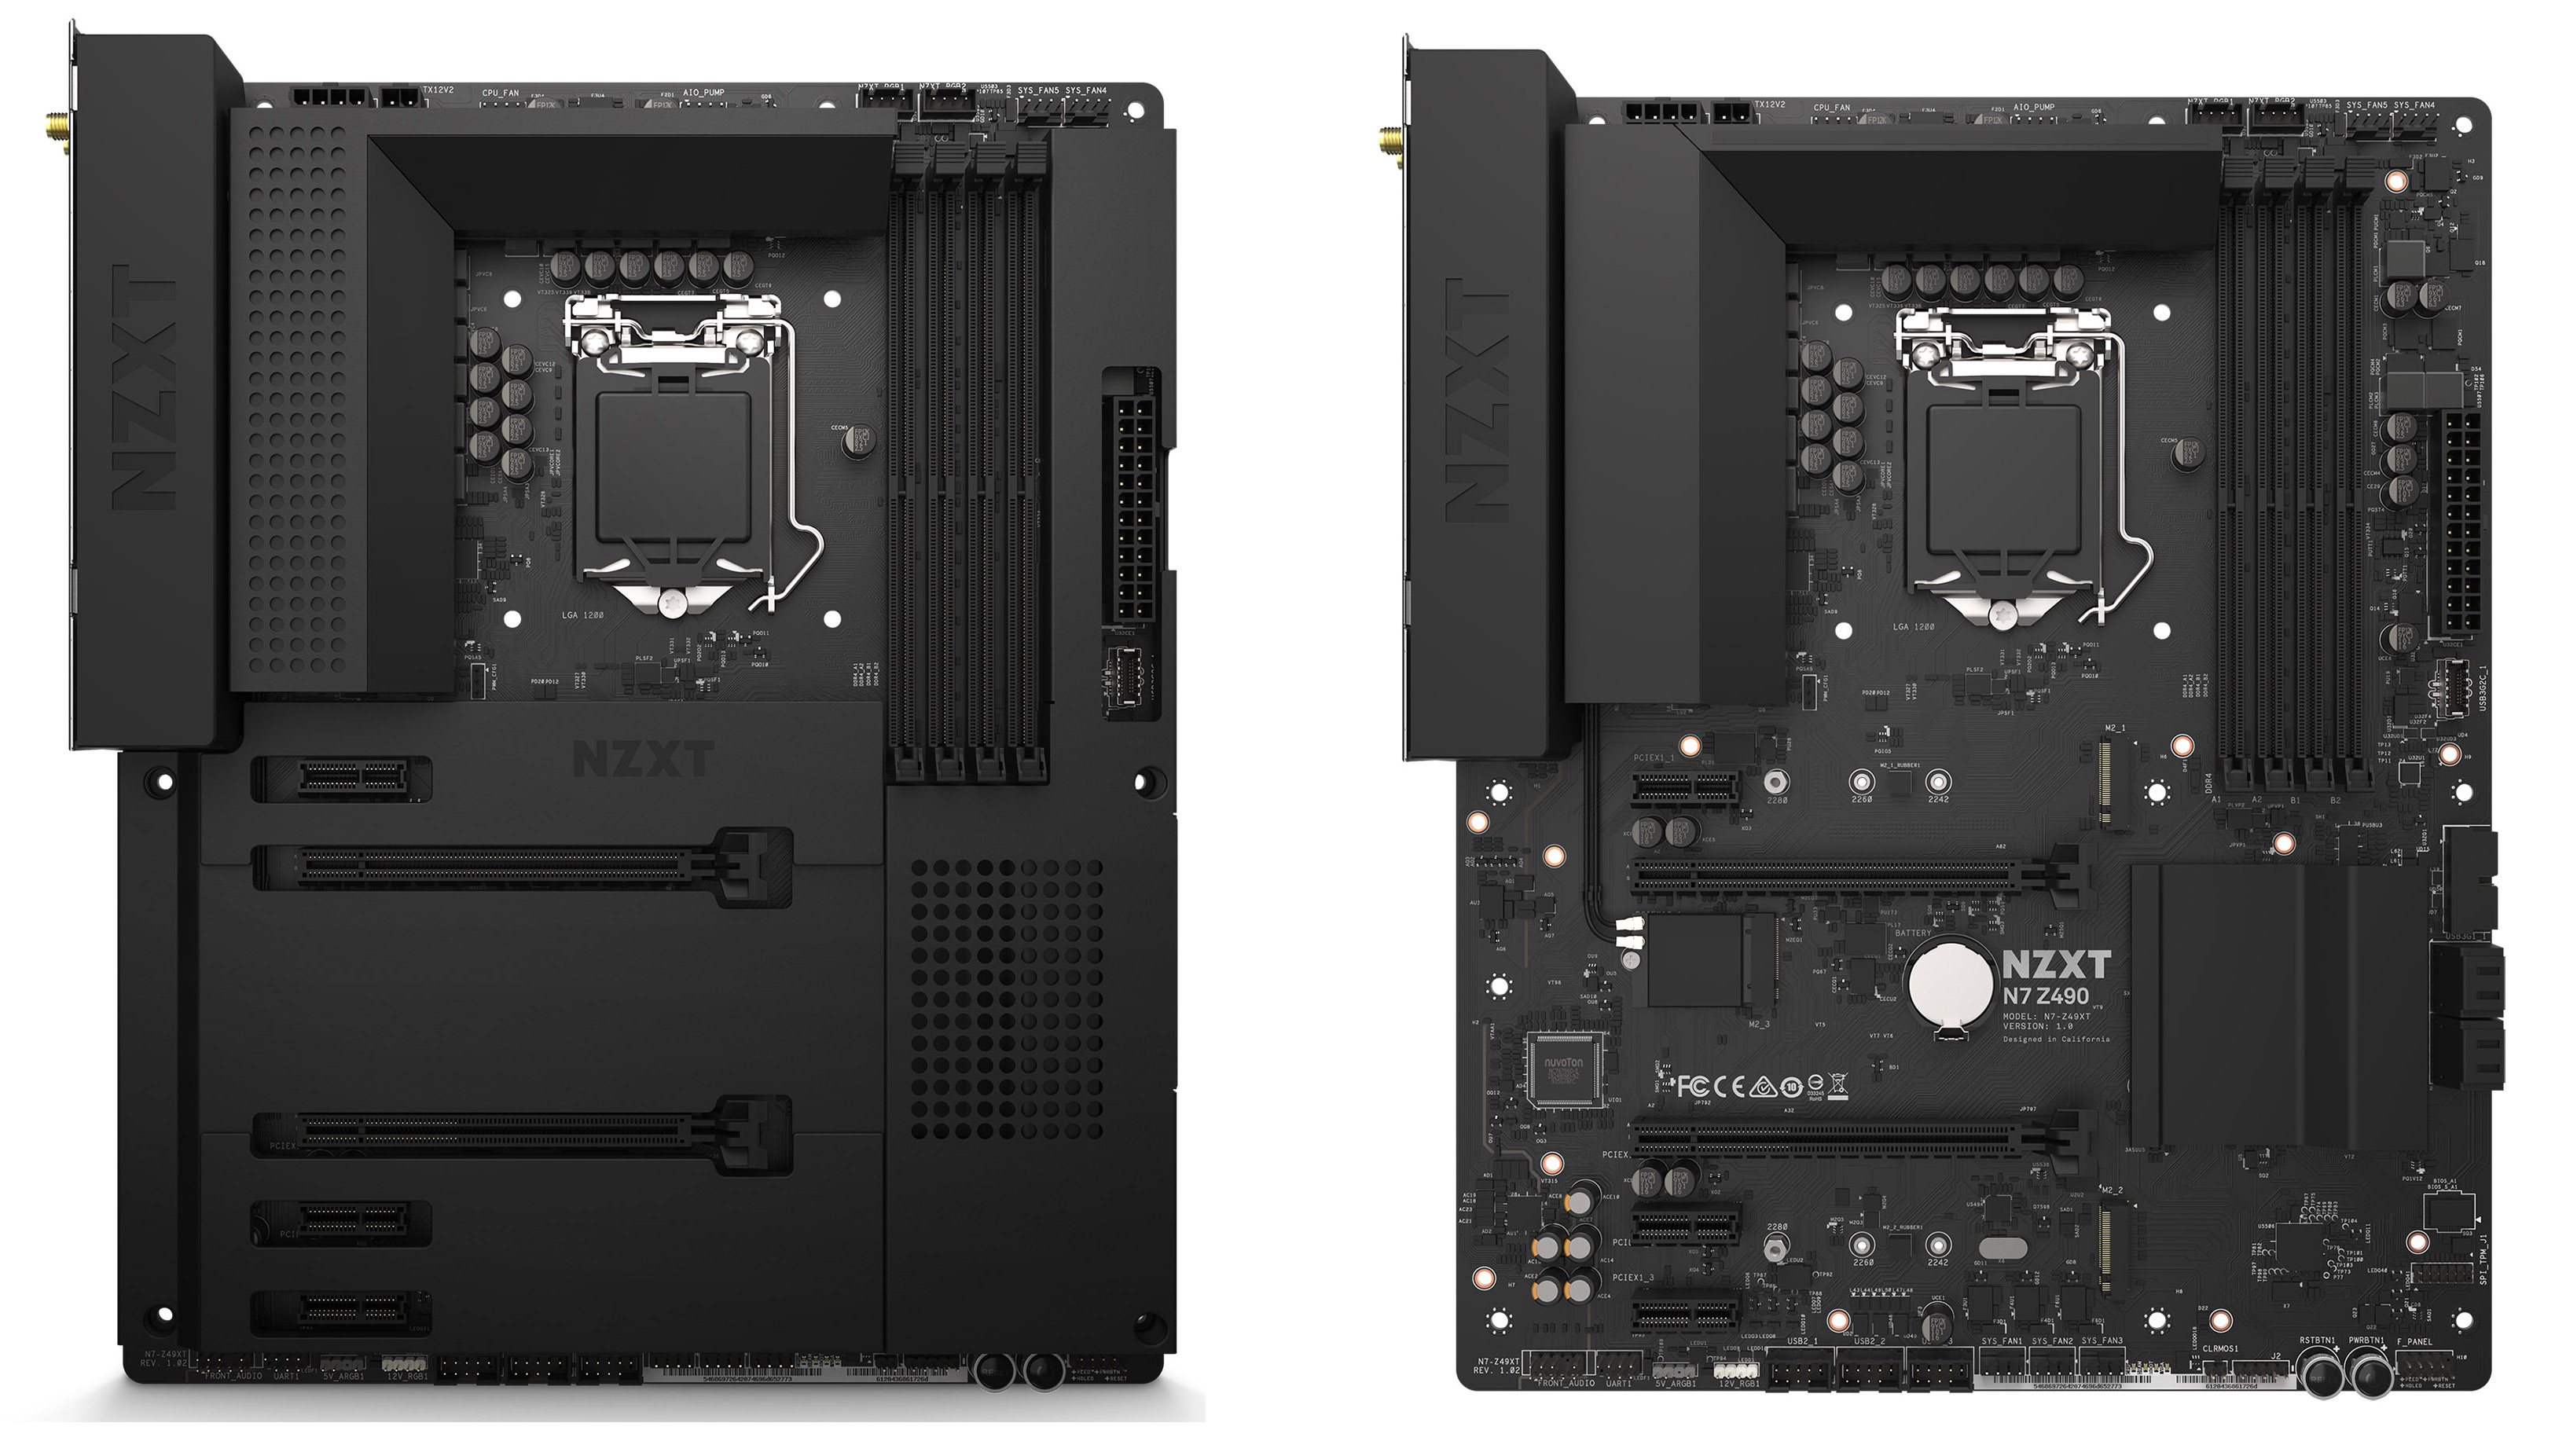 The NZXT N7 Z490 Motherboard Review: From A Different Direction